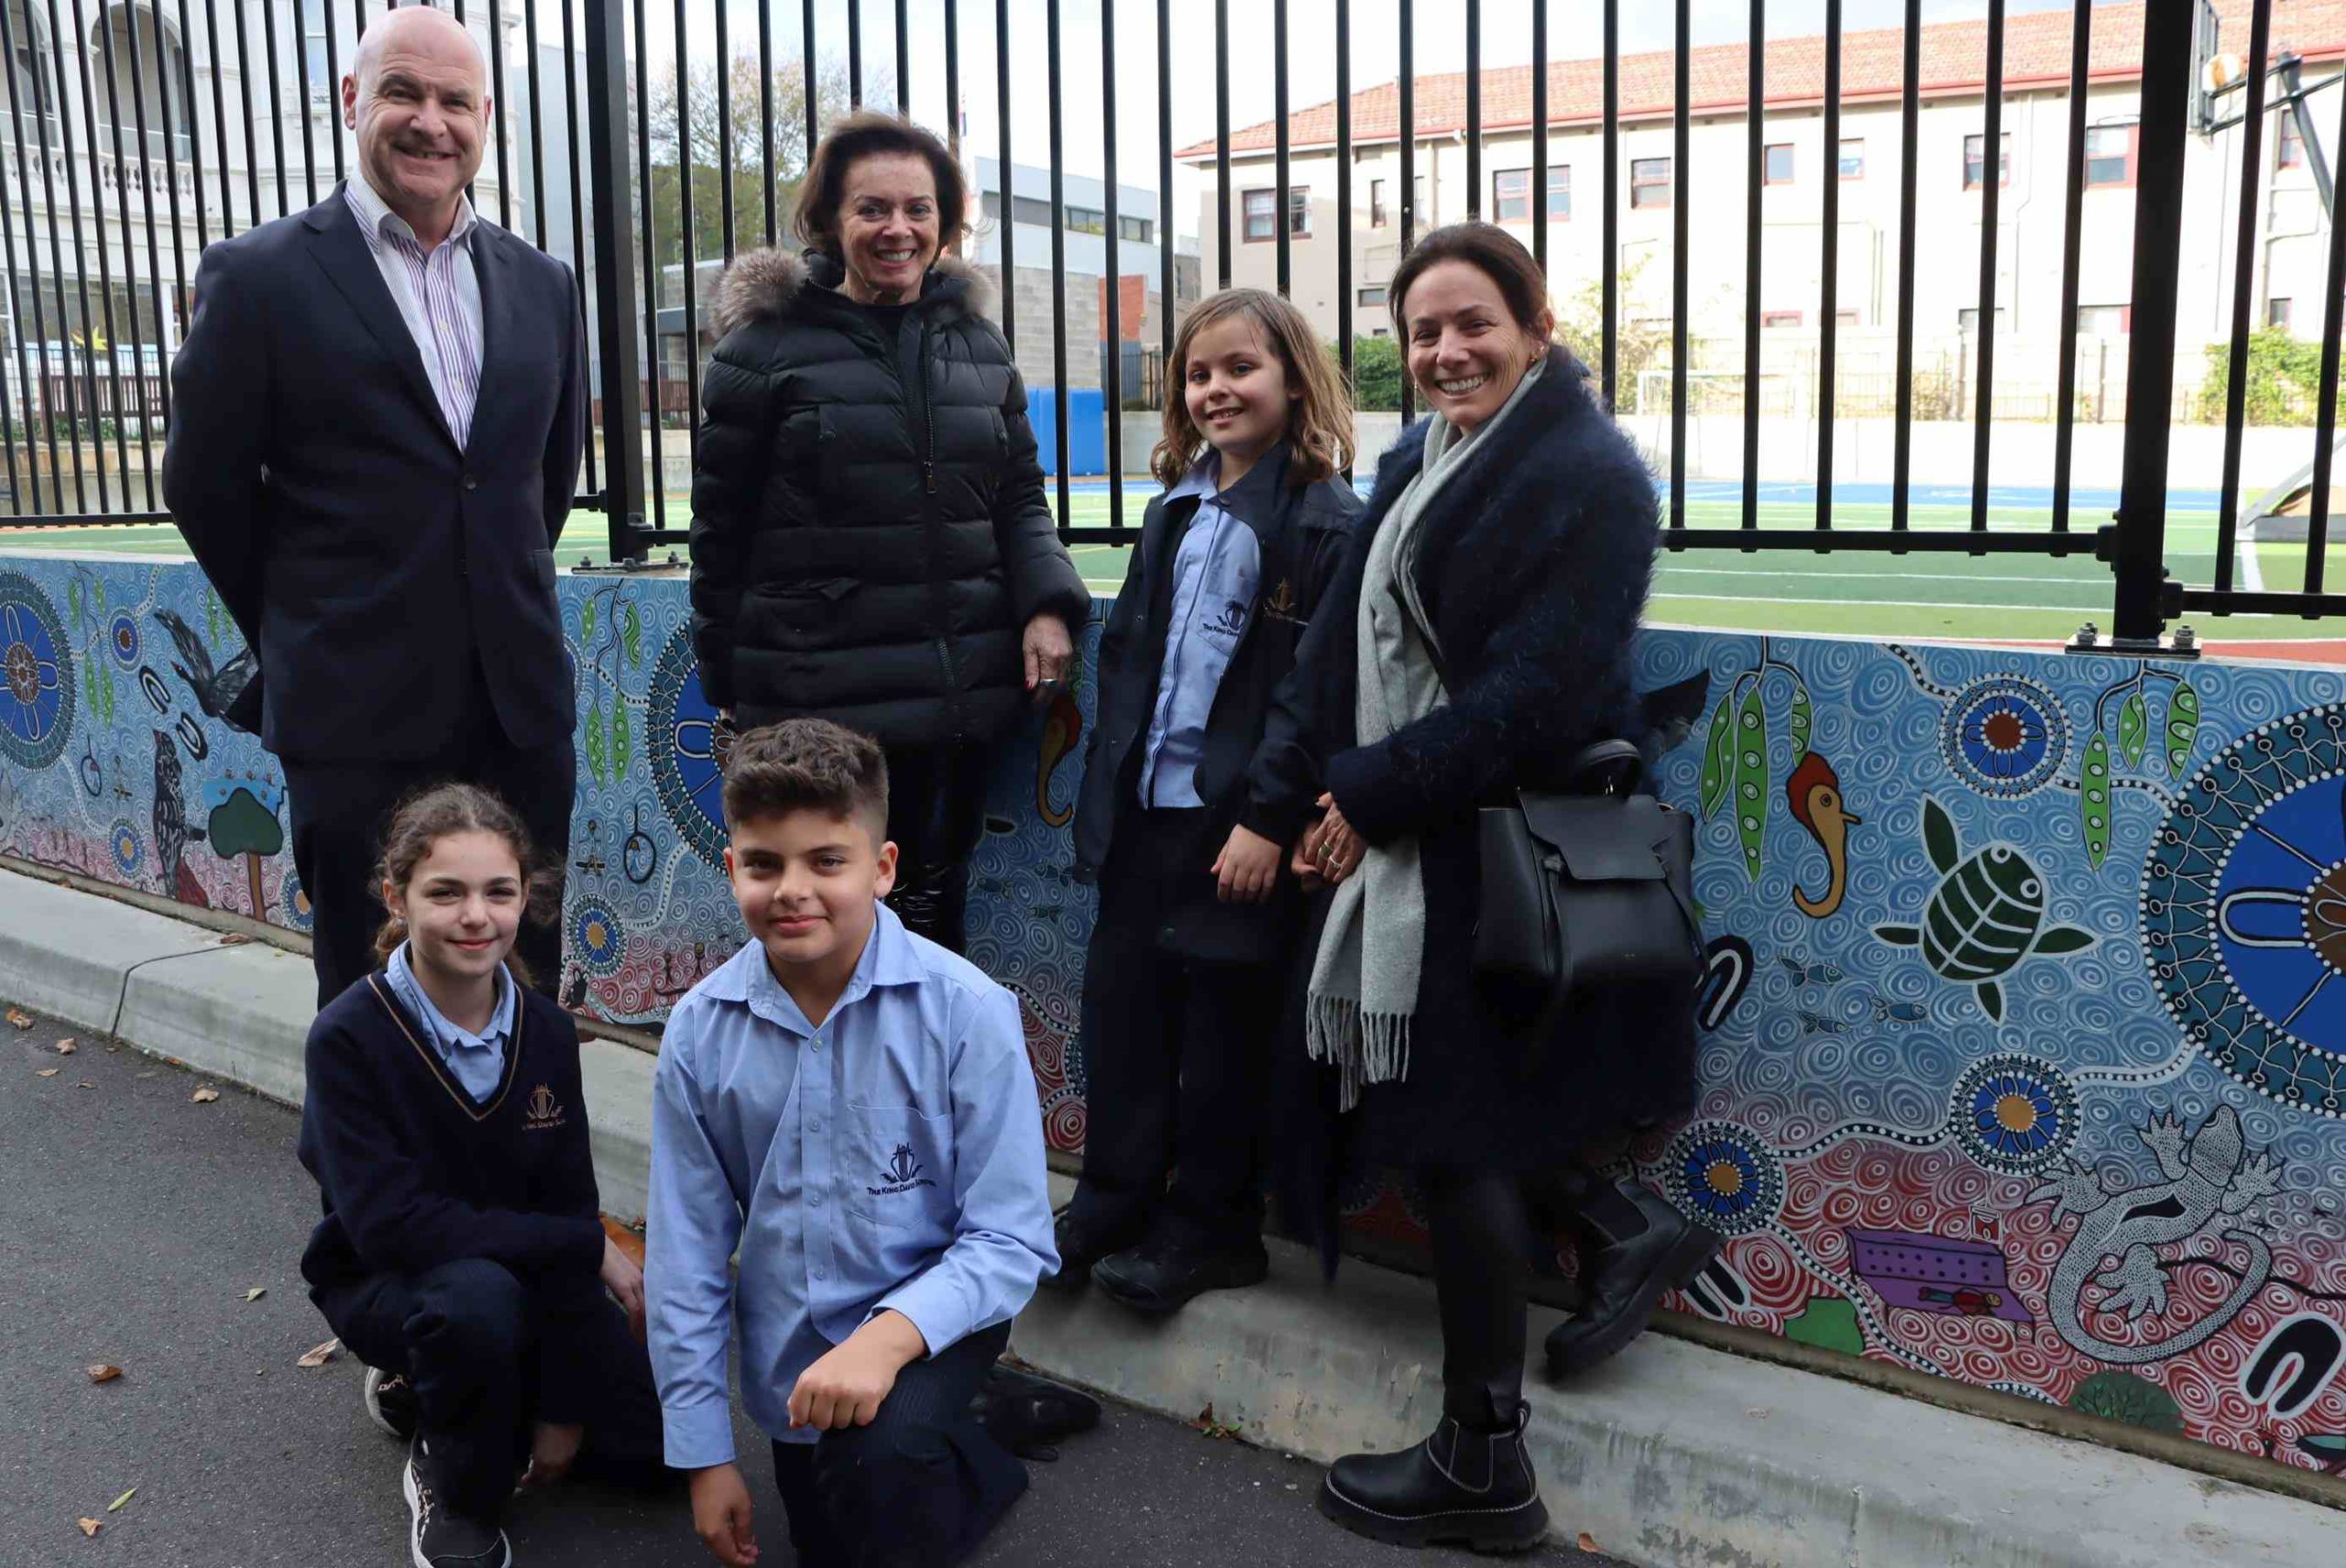 Three students and three adults stand in front of the new First Nations mural at the Dandenong Rd campus, they are looking at the camera and smiling